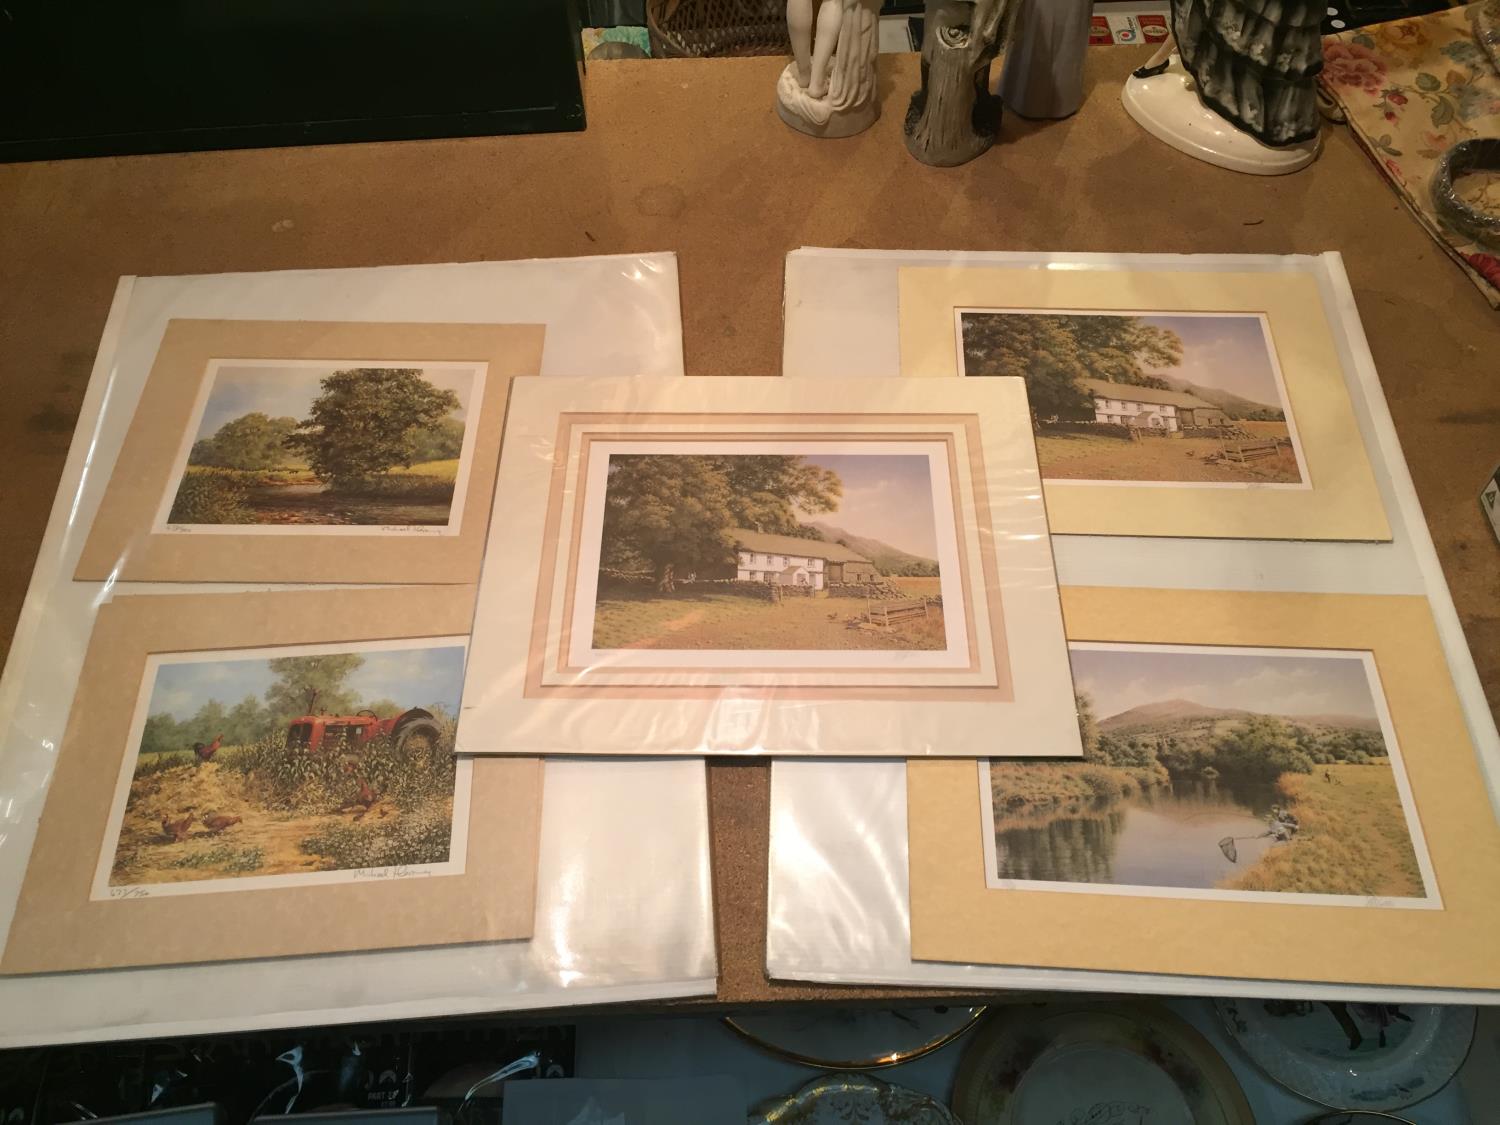 THREE MOUNTED SIGNED PRINTS OF FARM SCENES IN A HARDBACK PROTECTIVE FOLDER